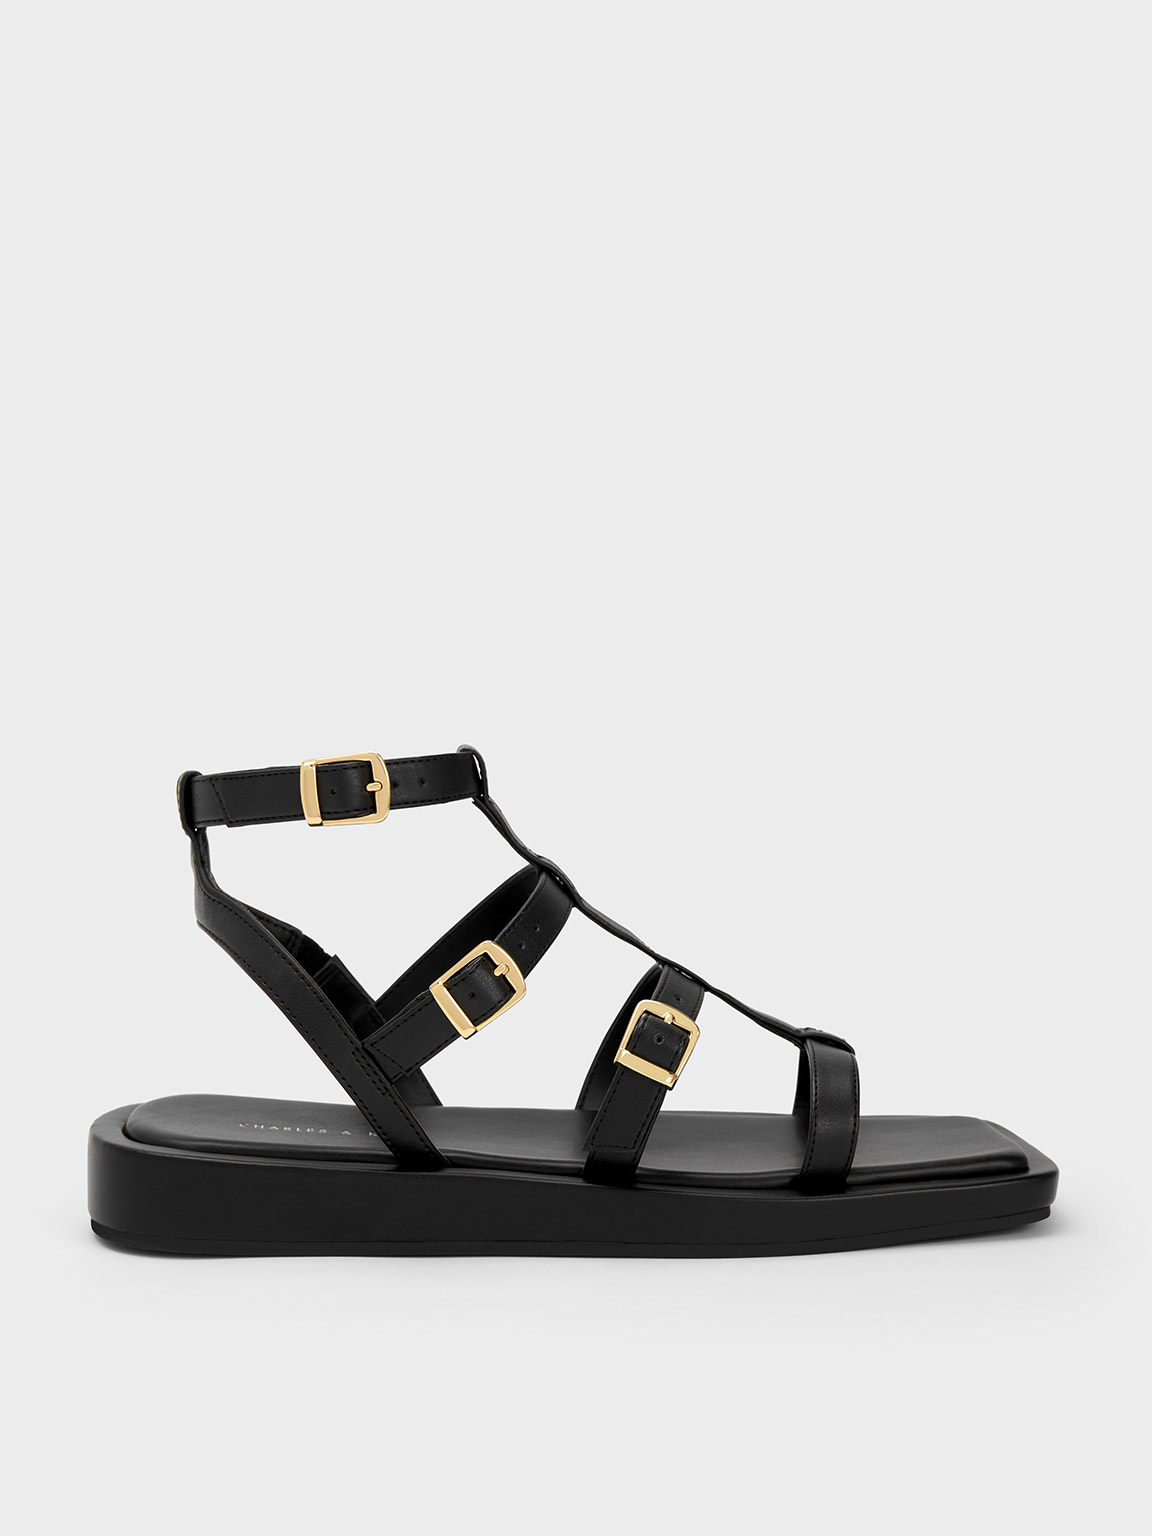 LV SANDAL FIRST COPY INDIA ONLINE